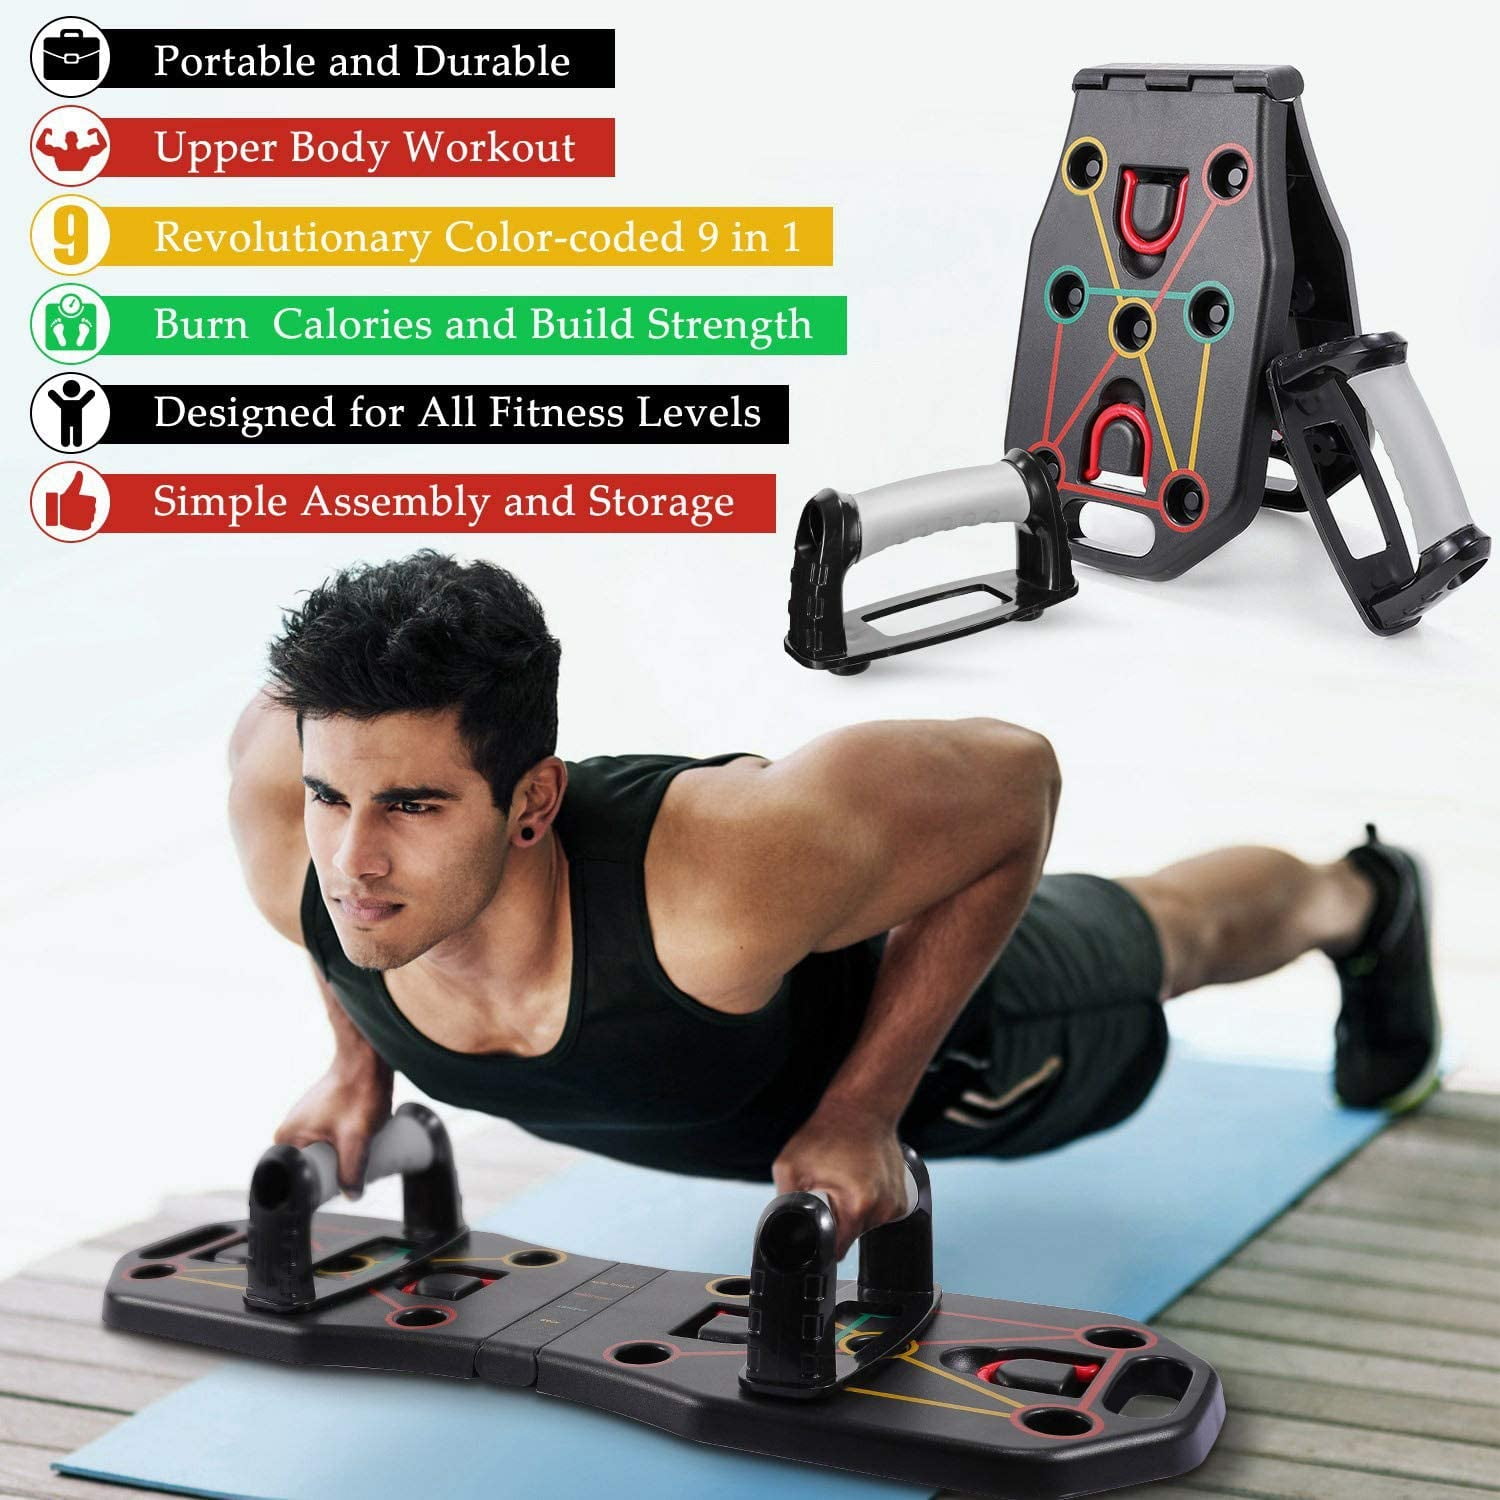 Gym Equipment Press Up Board for Men and Women Multifunction Home Workout Push Up Board Foldable 9 in 1 Muscle Board